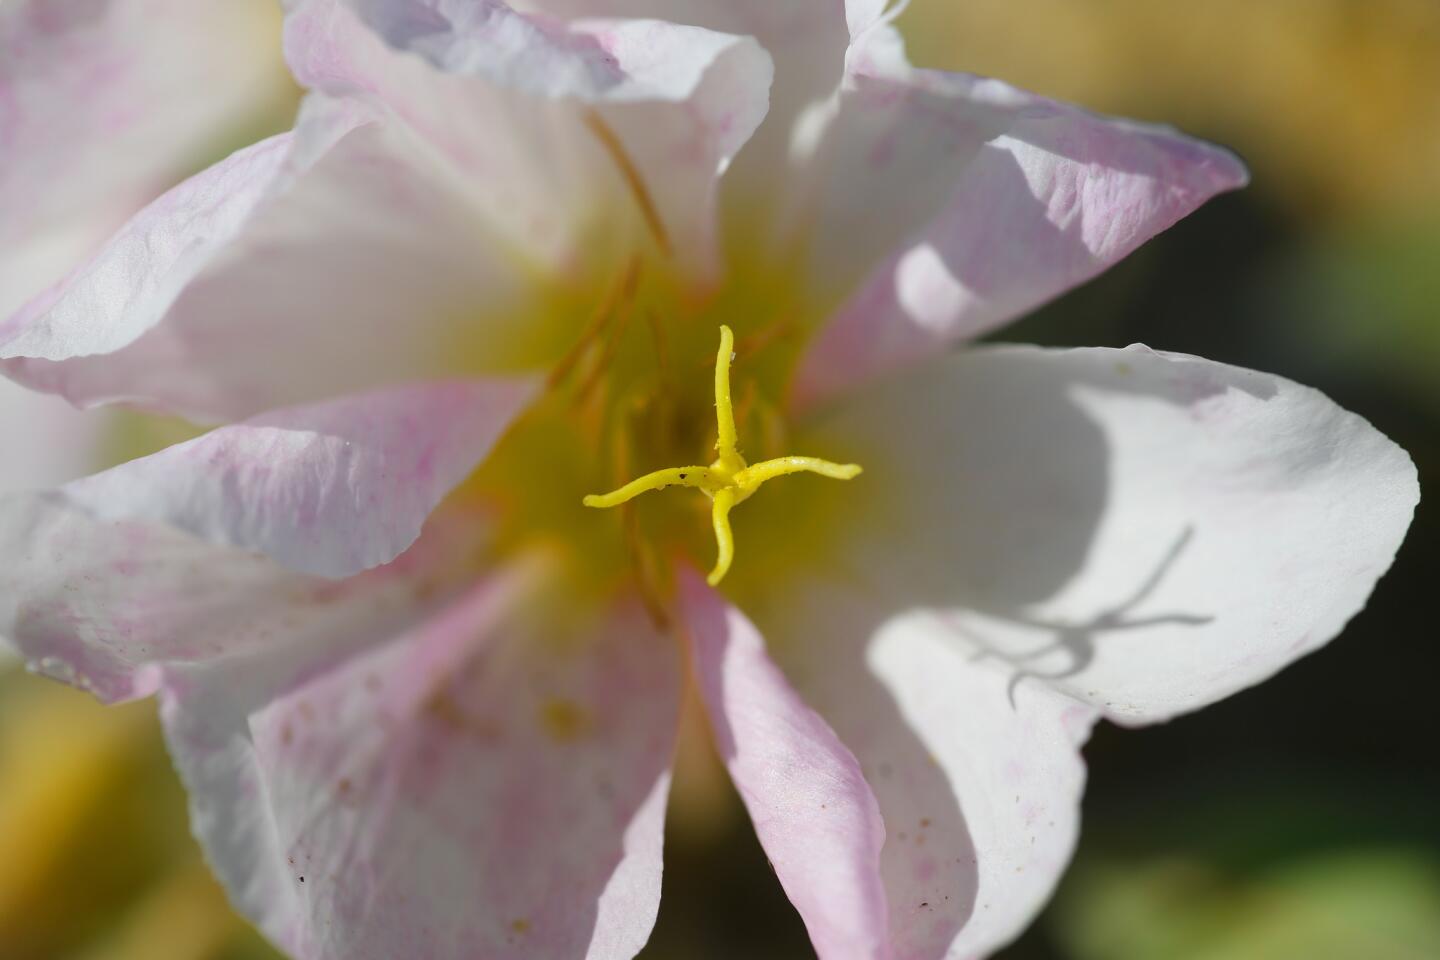 An Evening Primrose has bloomed with more expected in the week or two at Anza-Borrego Desert.